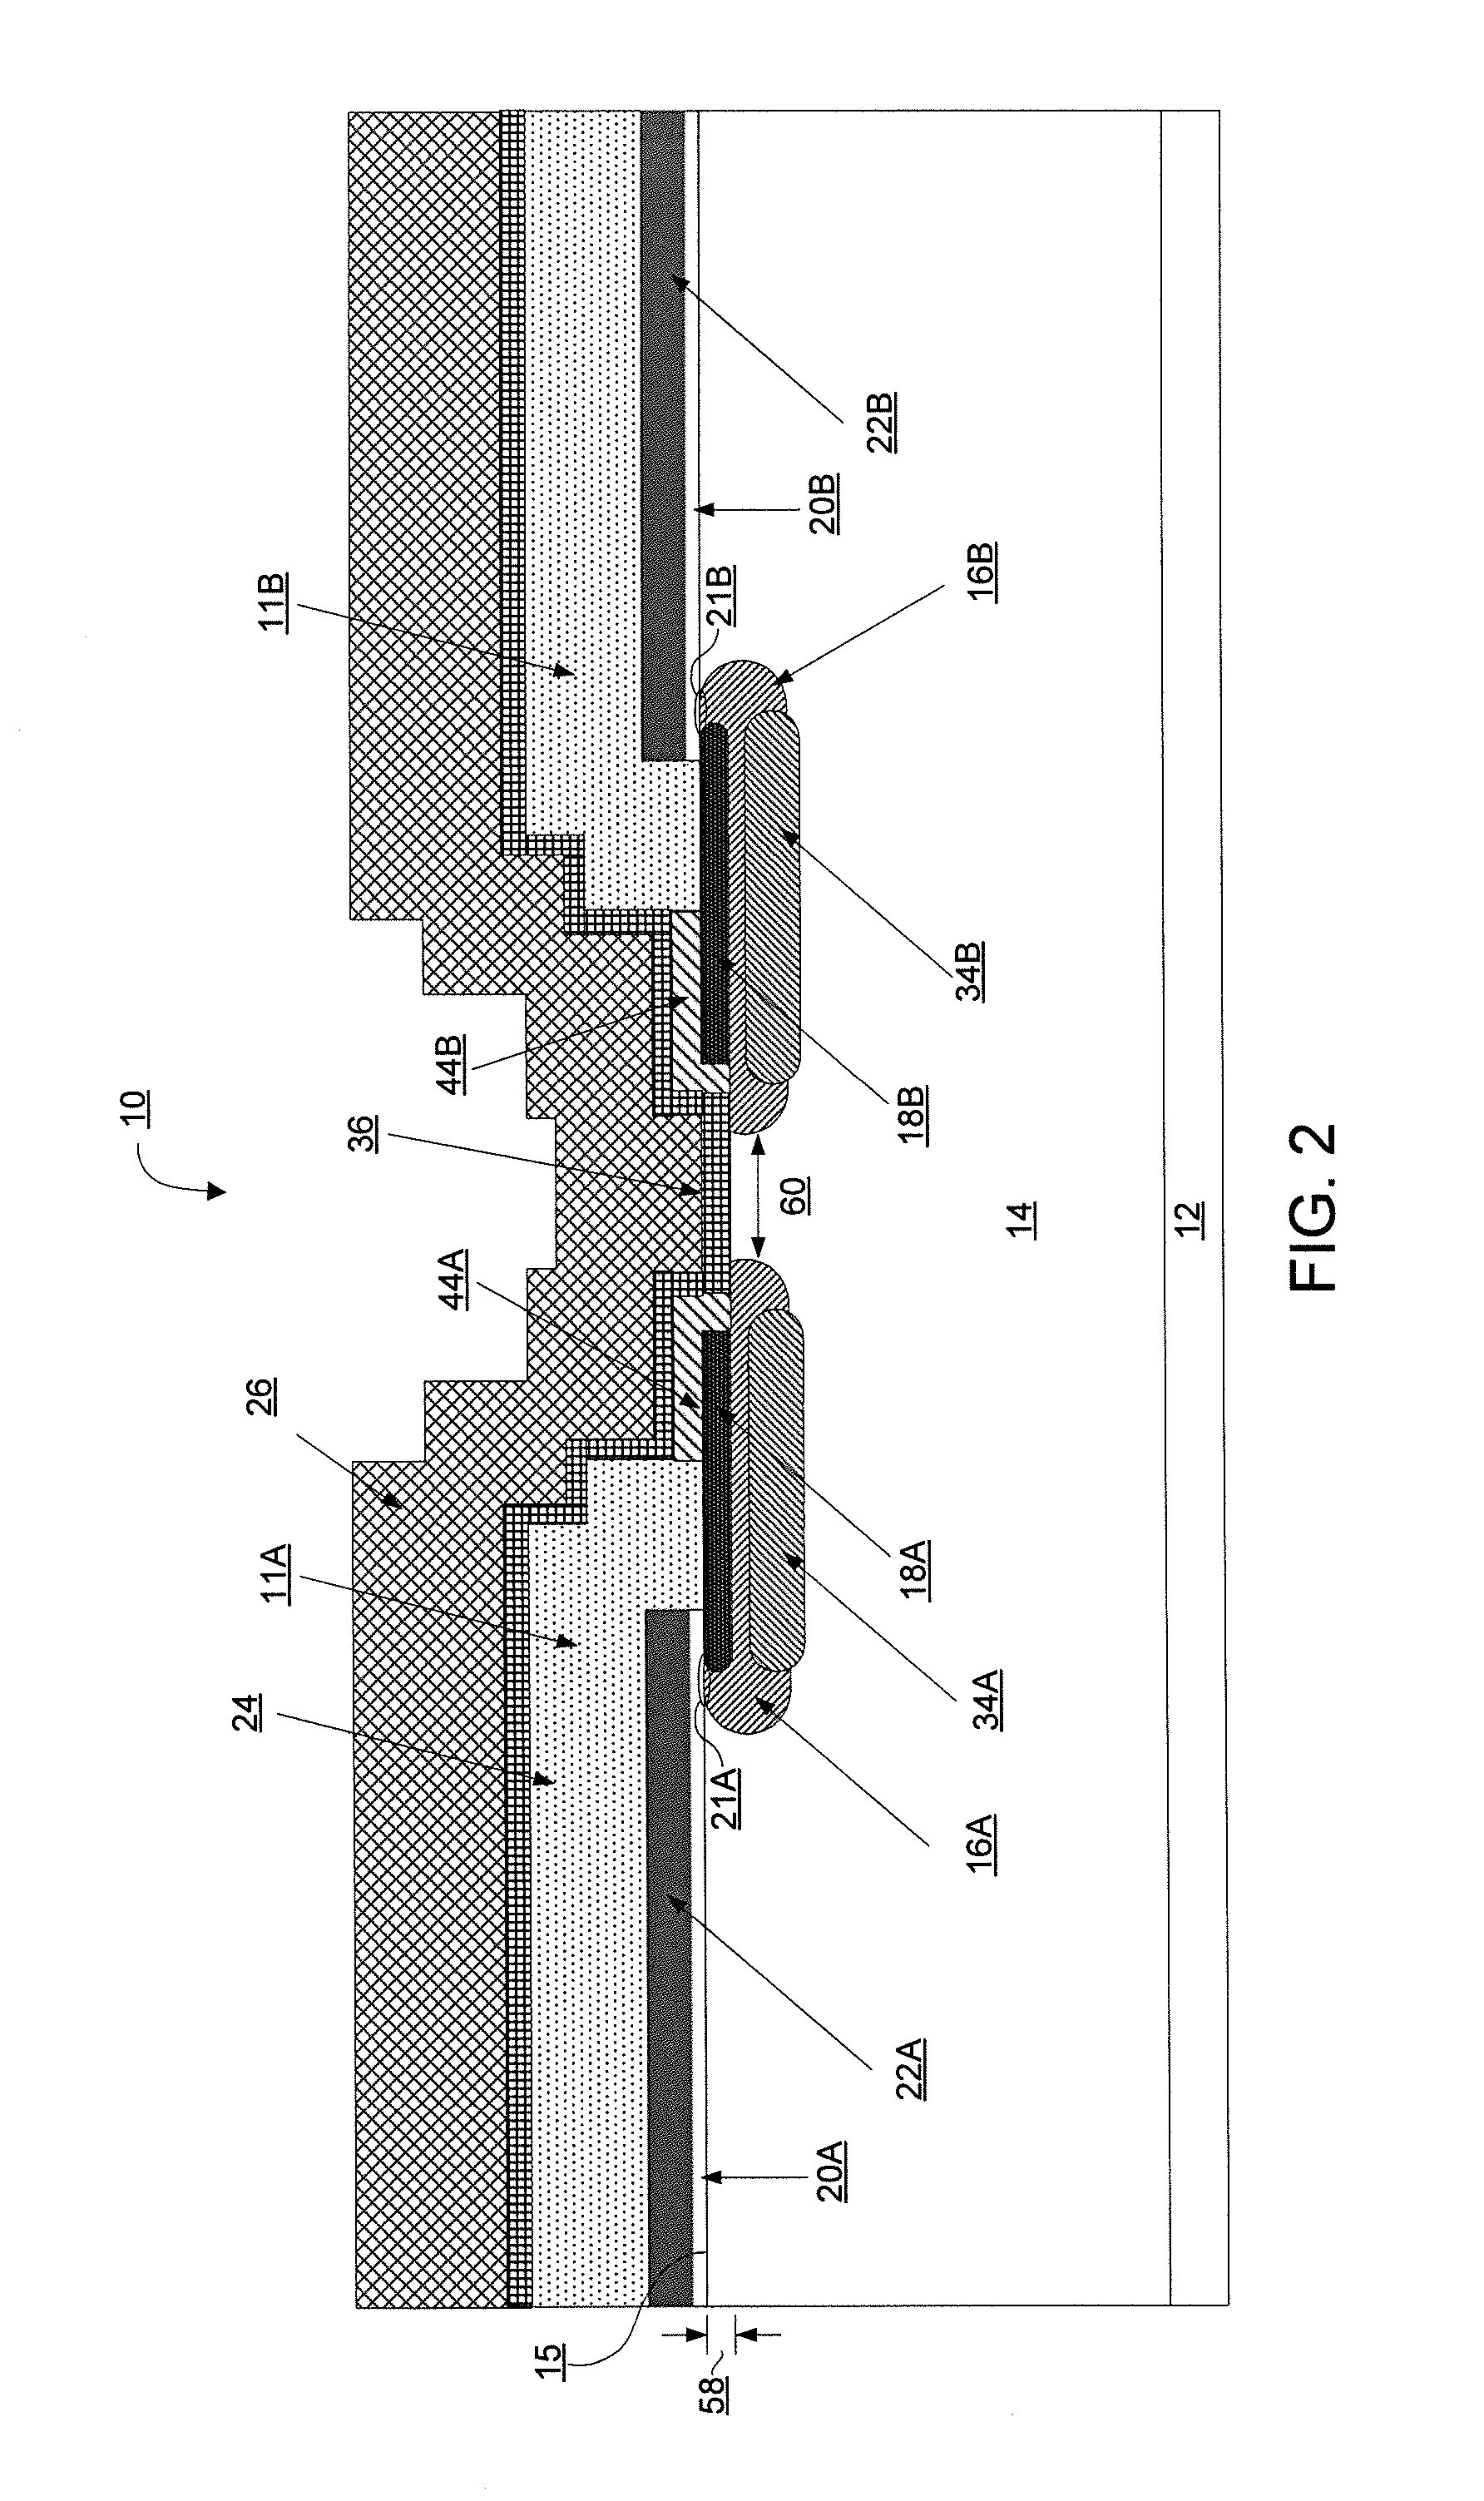 Monolithically integrated sic mosfet and schottky barrier diode